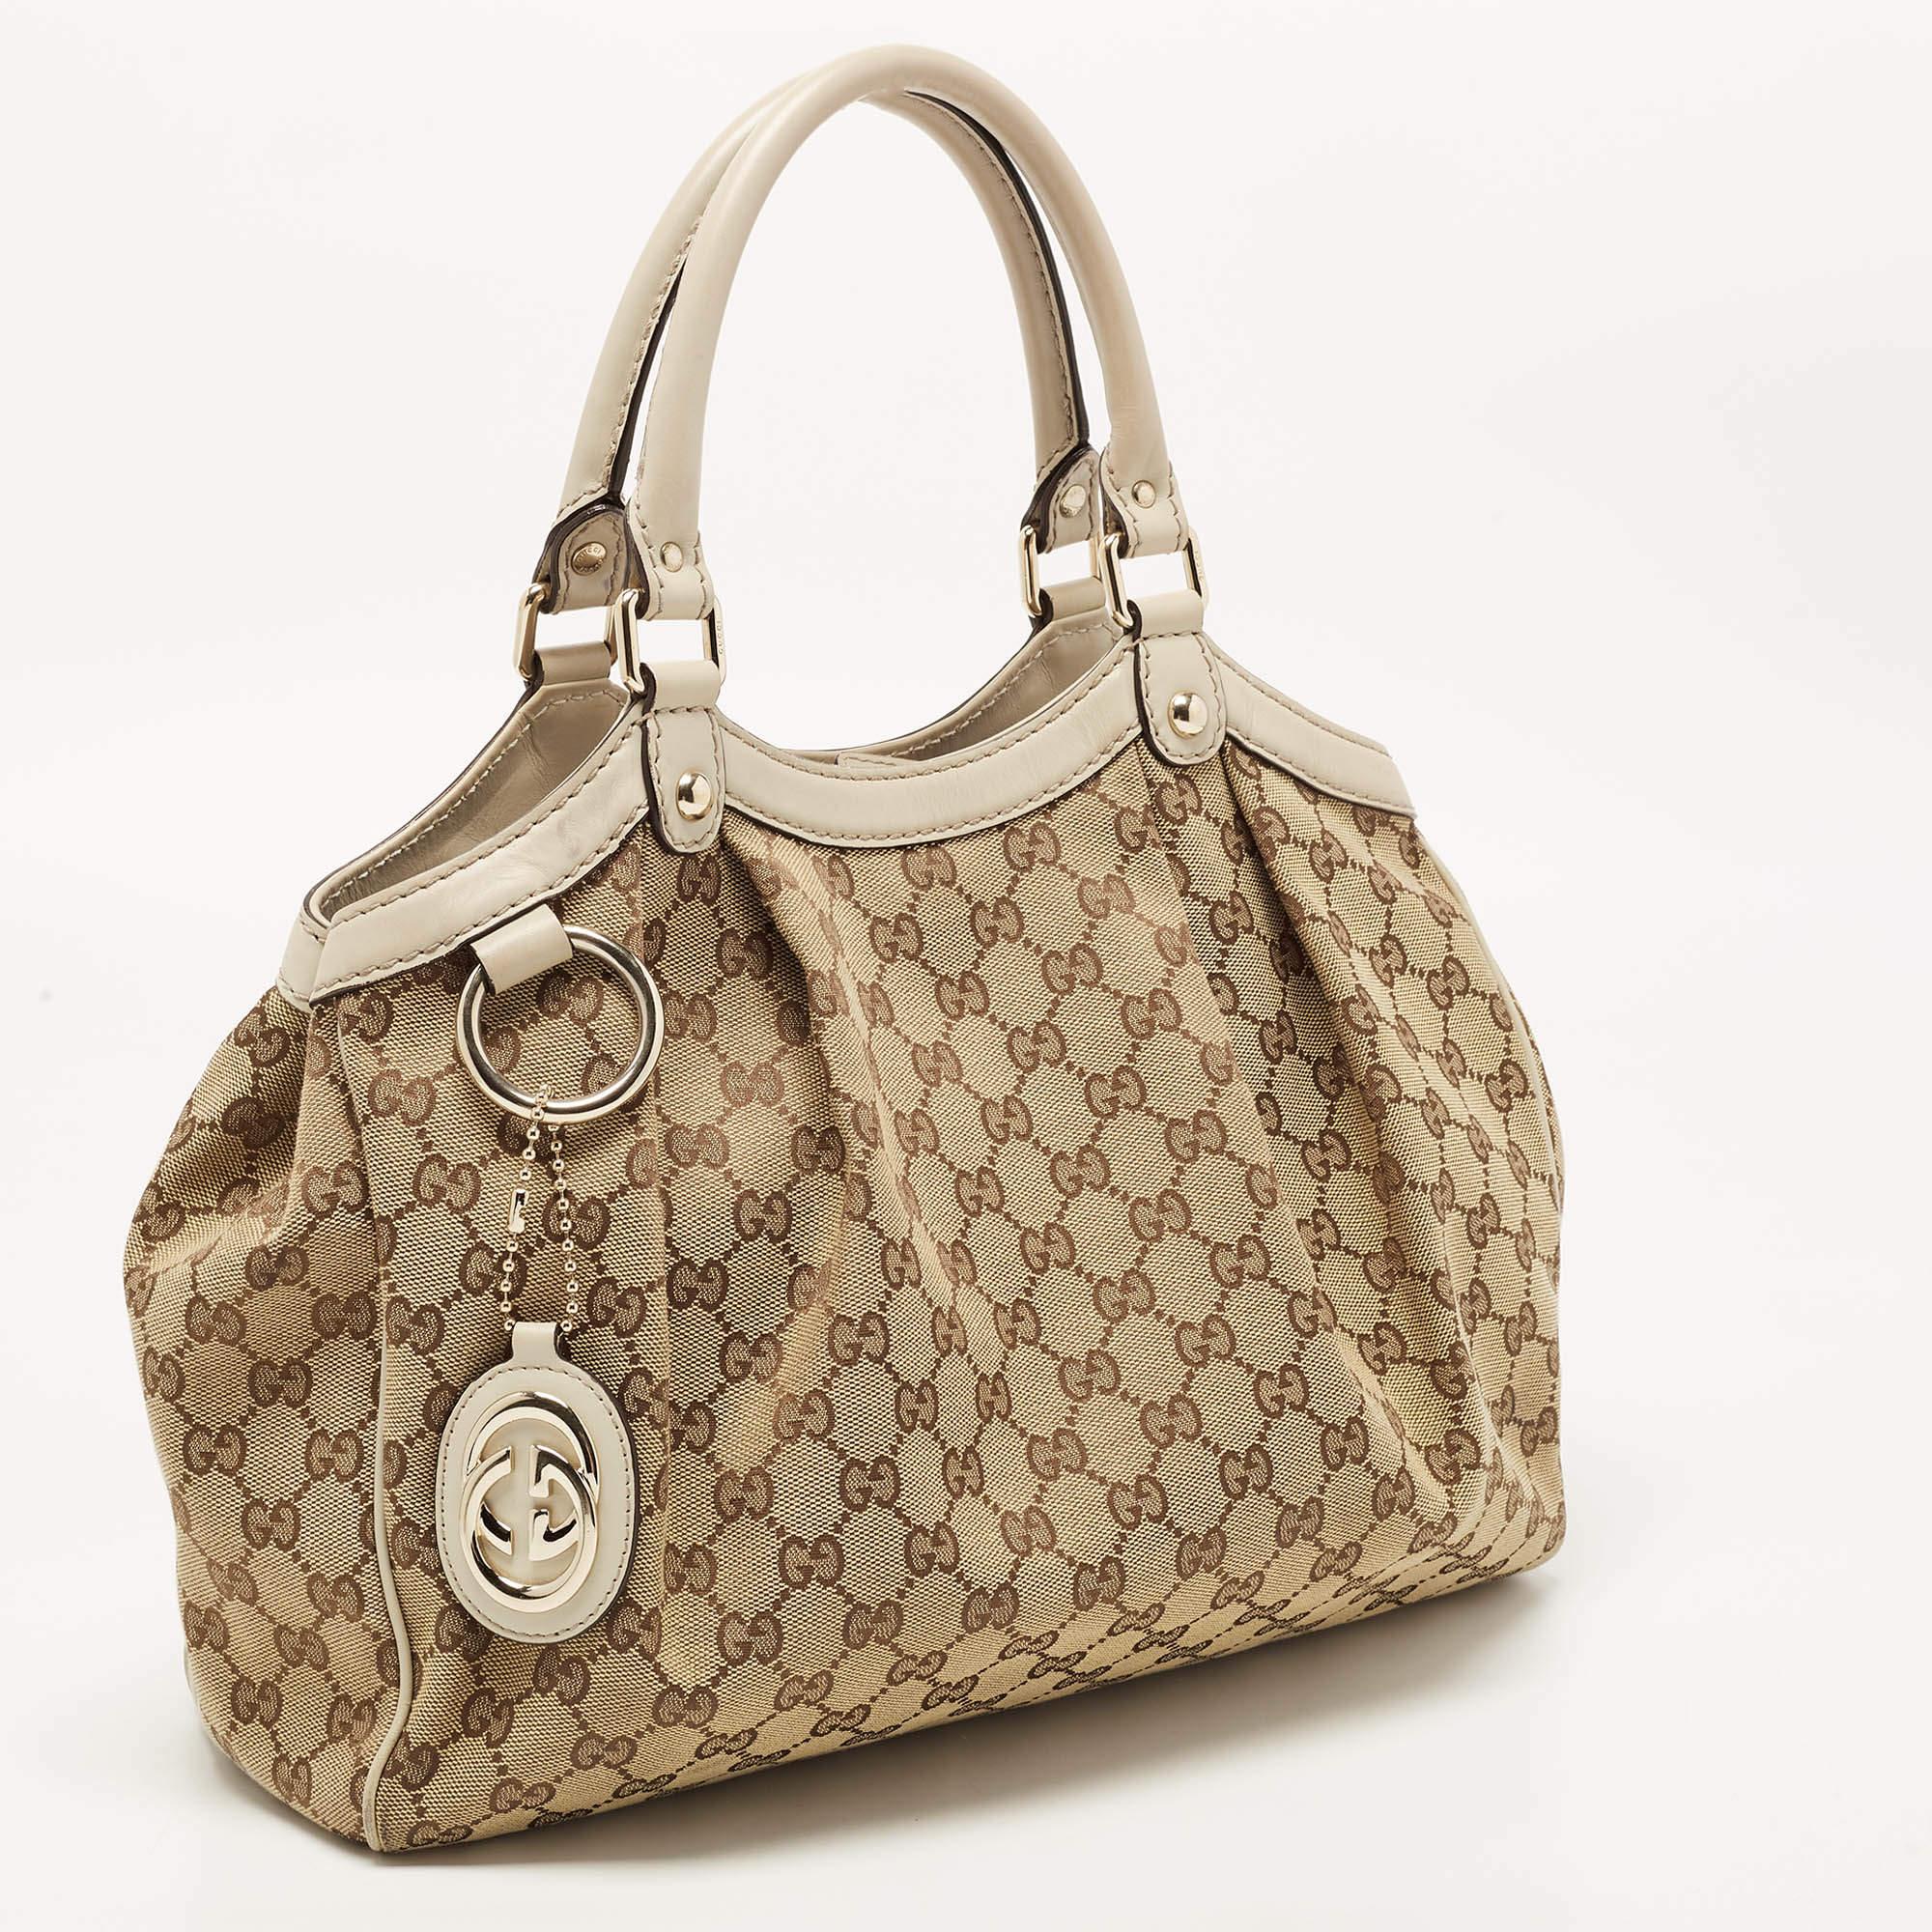 Women's Gucci Beige GG Canvas and Leather Medium Sukey Tote